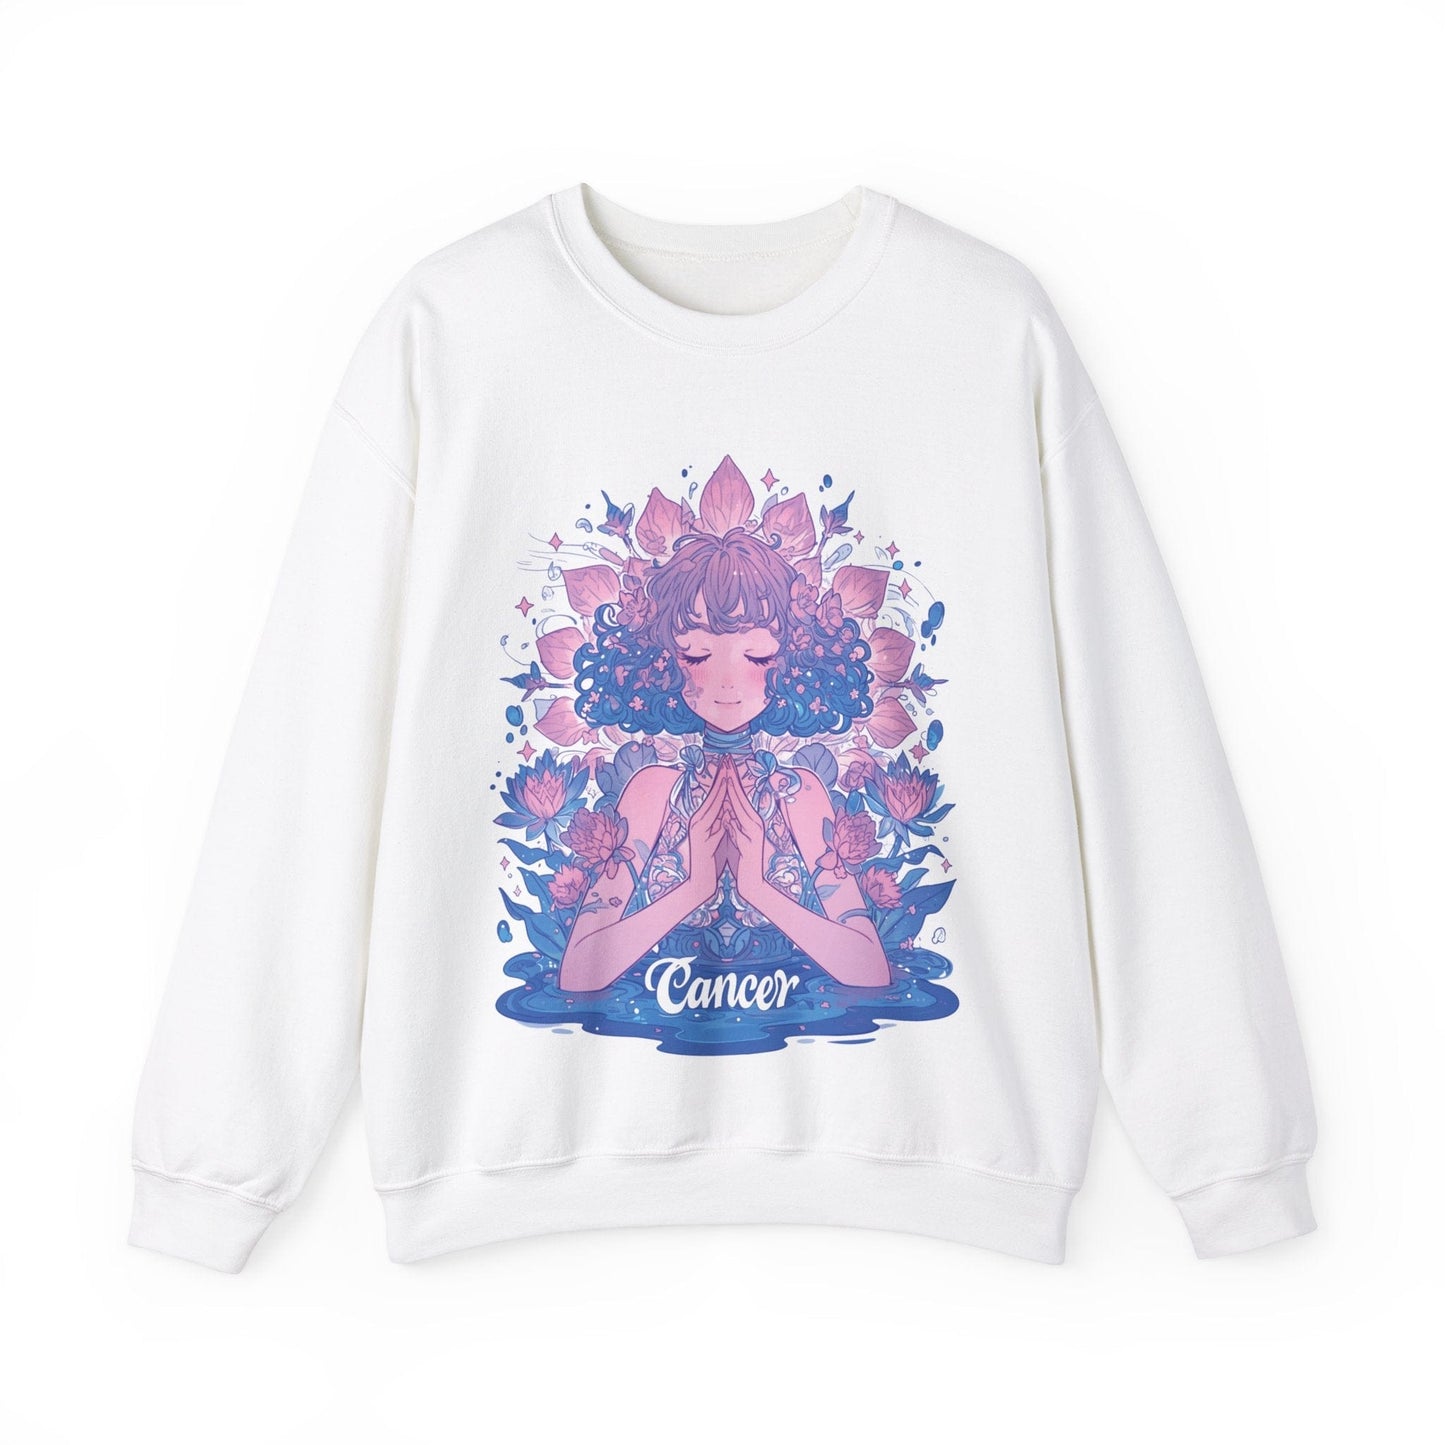 Sweatshirt S / White Lunar Bloom Cancer Sweater: Embrace Tranquility